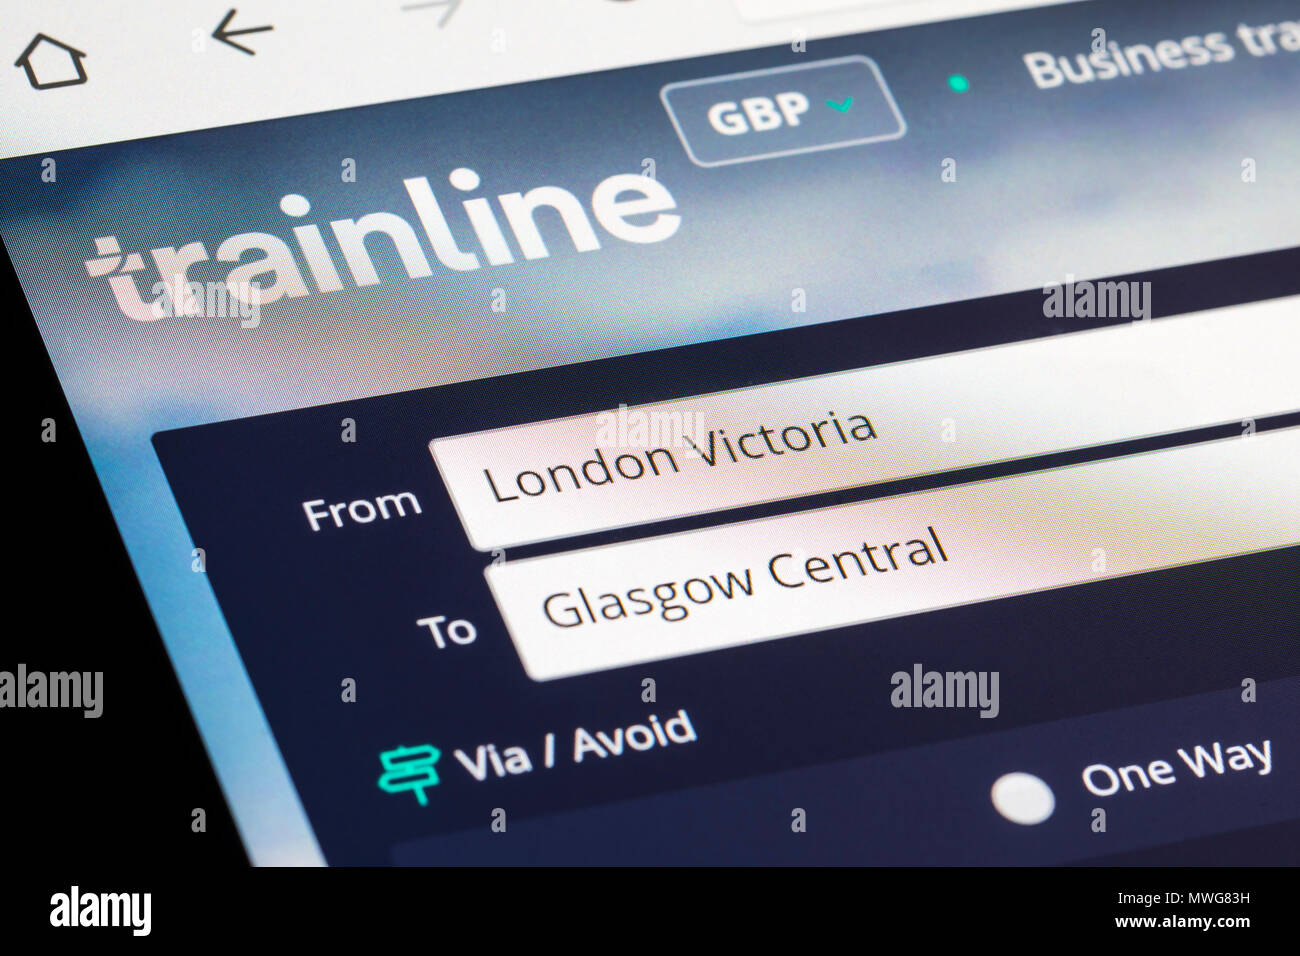 Trainline website for booking train journeys on the Internet in the UK. London Victoria to Glasgow Central. Taking the train. Booking trains online. Stock Photo